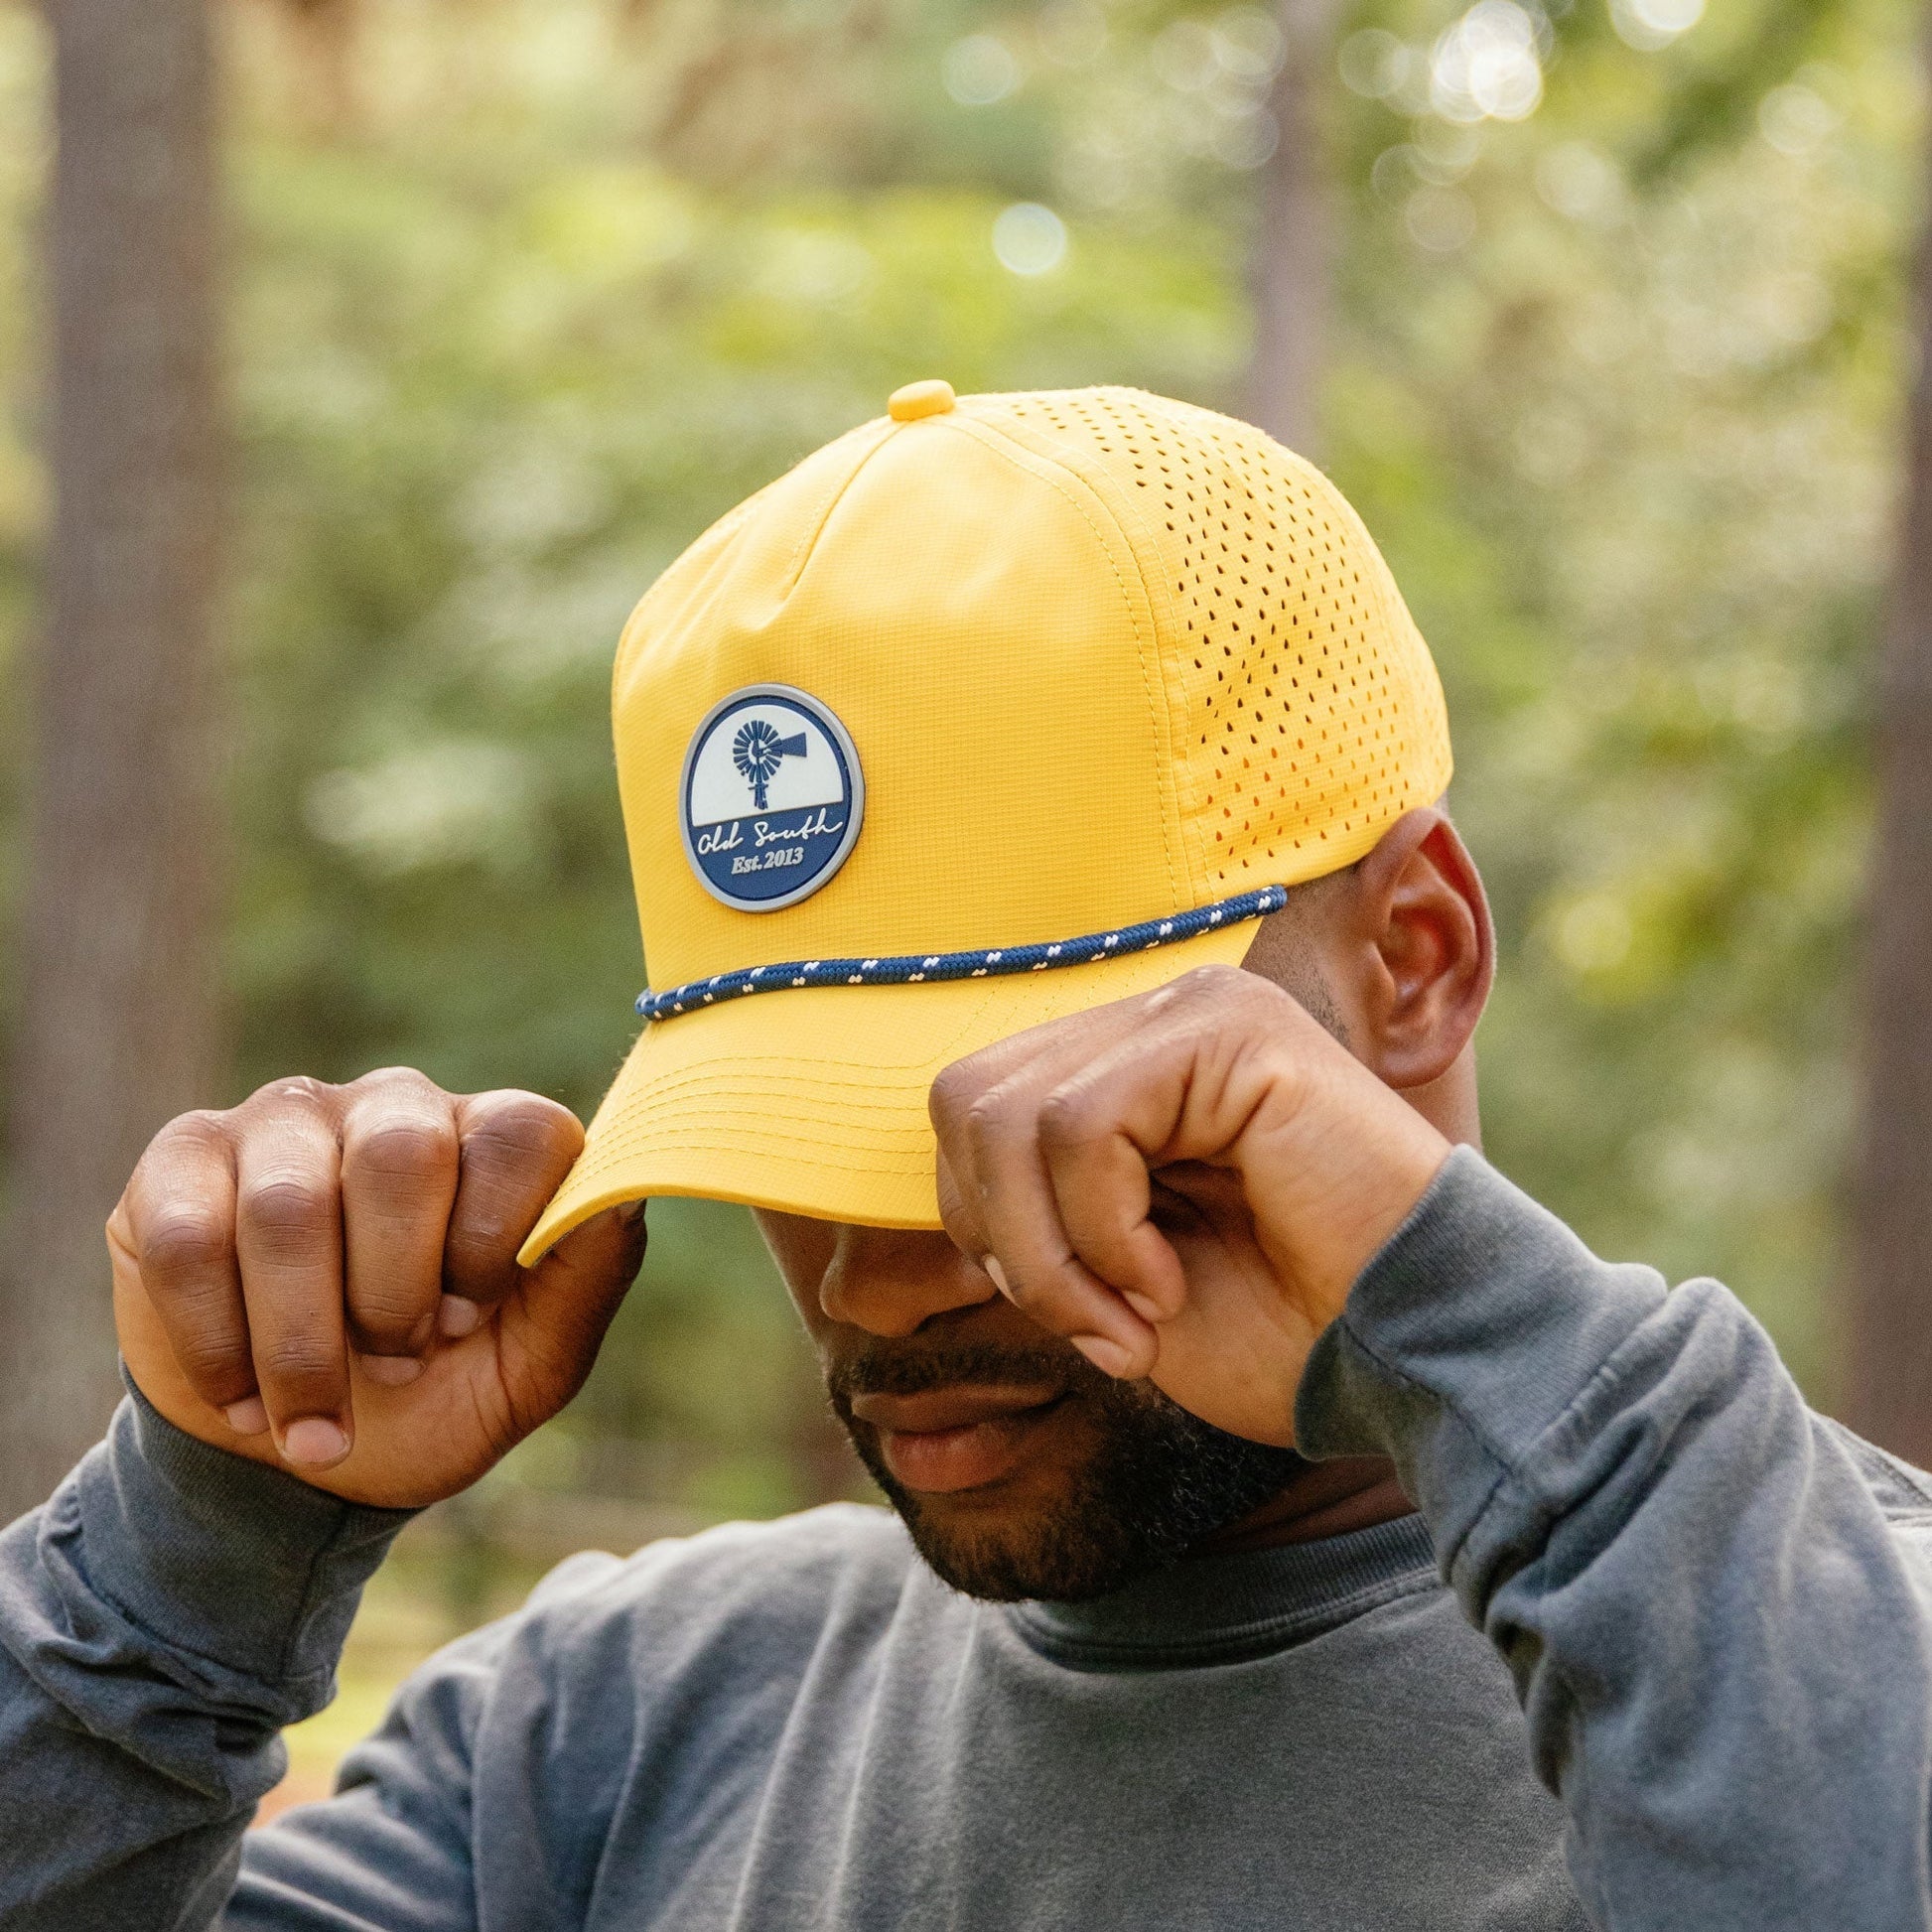 Old South Classic Circle Patch Hydro Hat